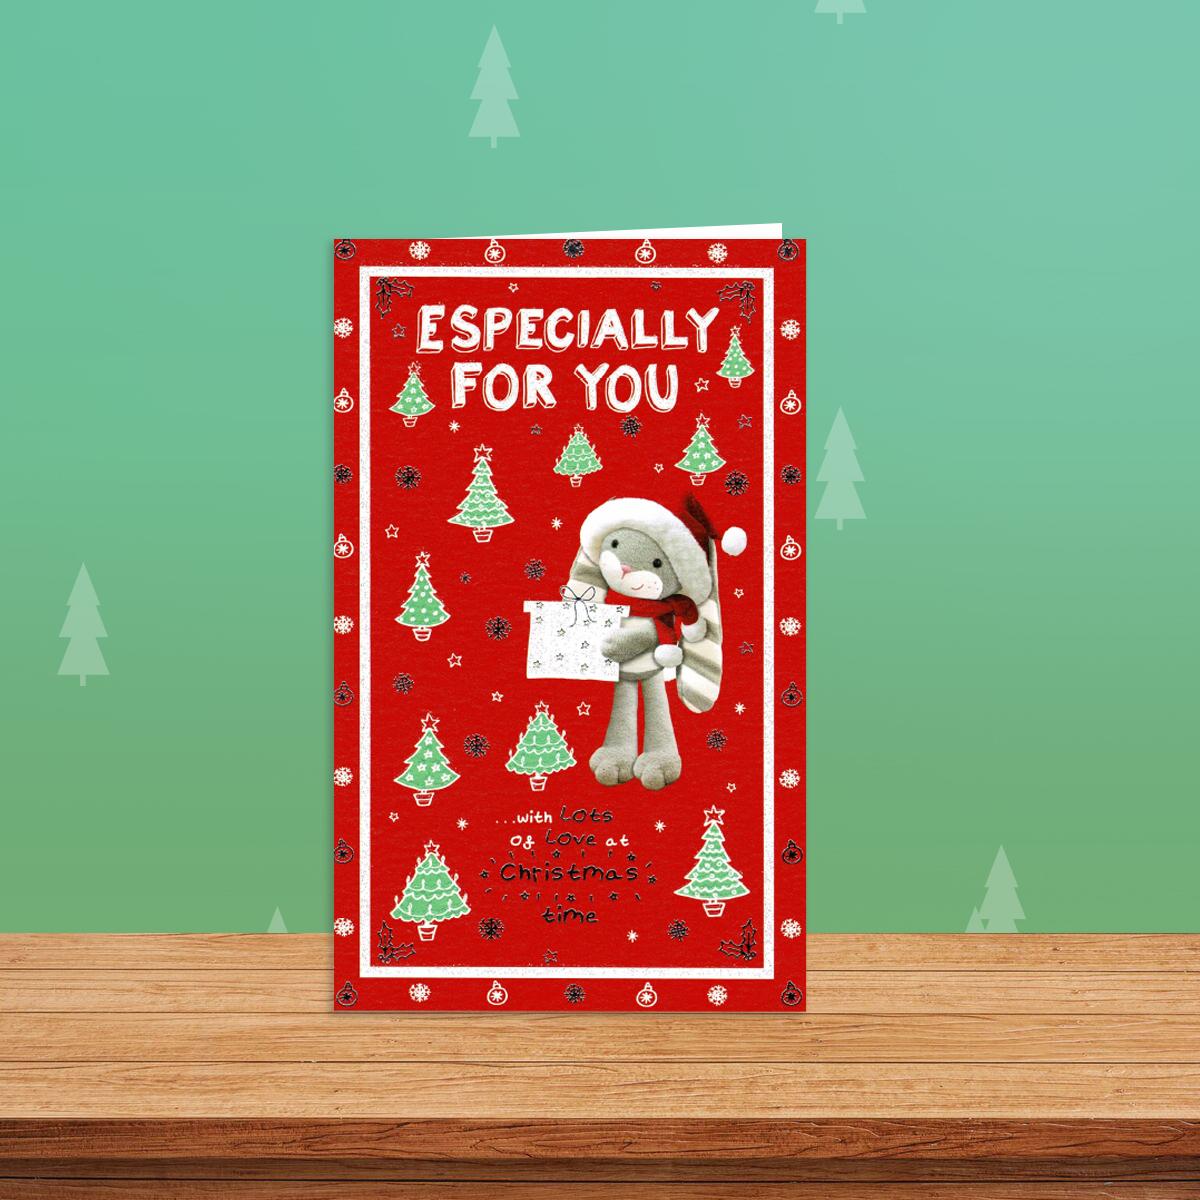 Especially For You Christmas Card Alongside Its Red Envelope